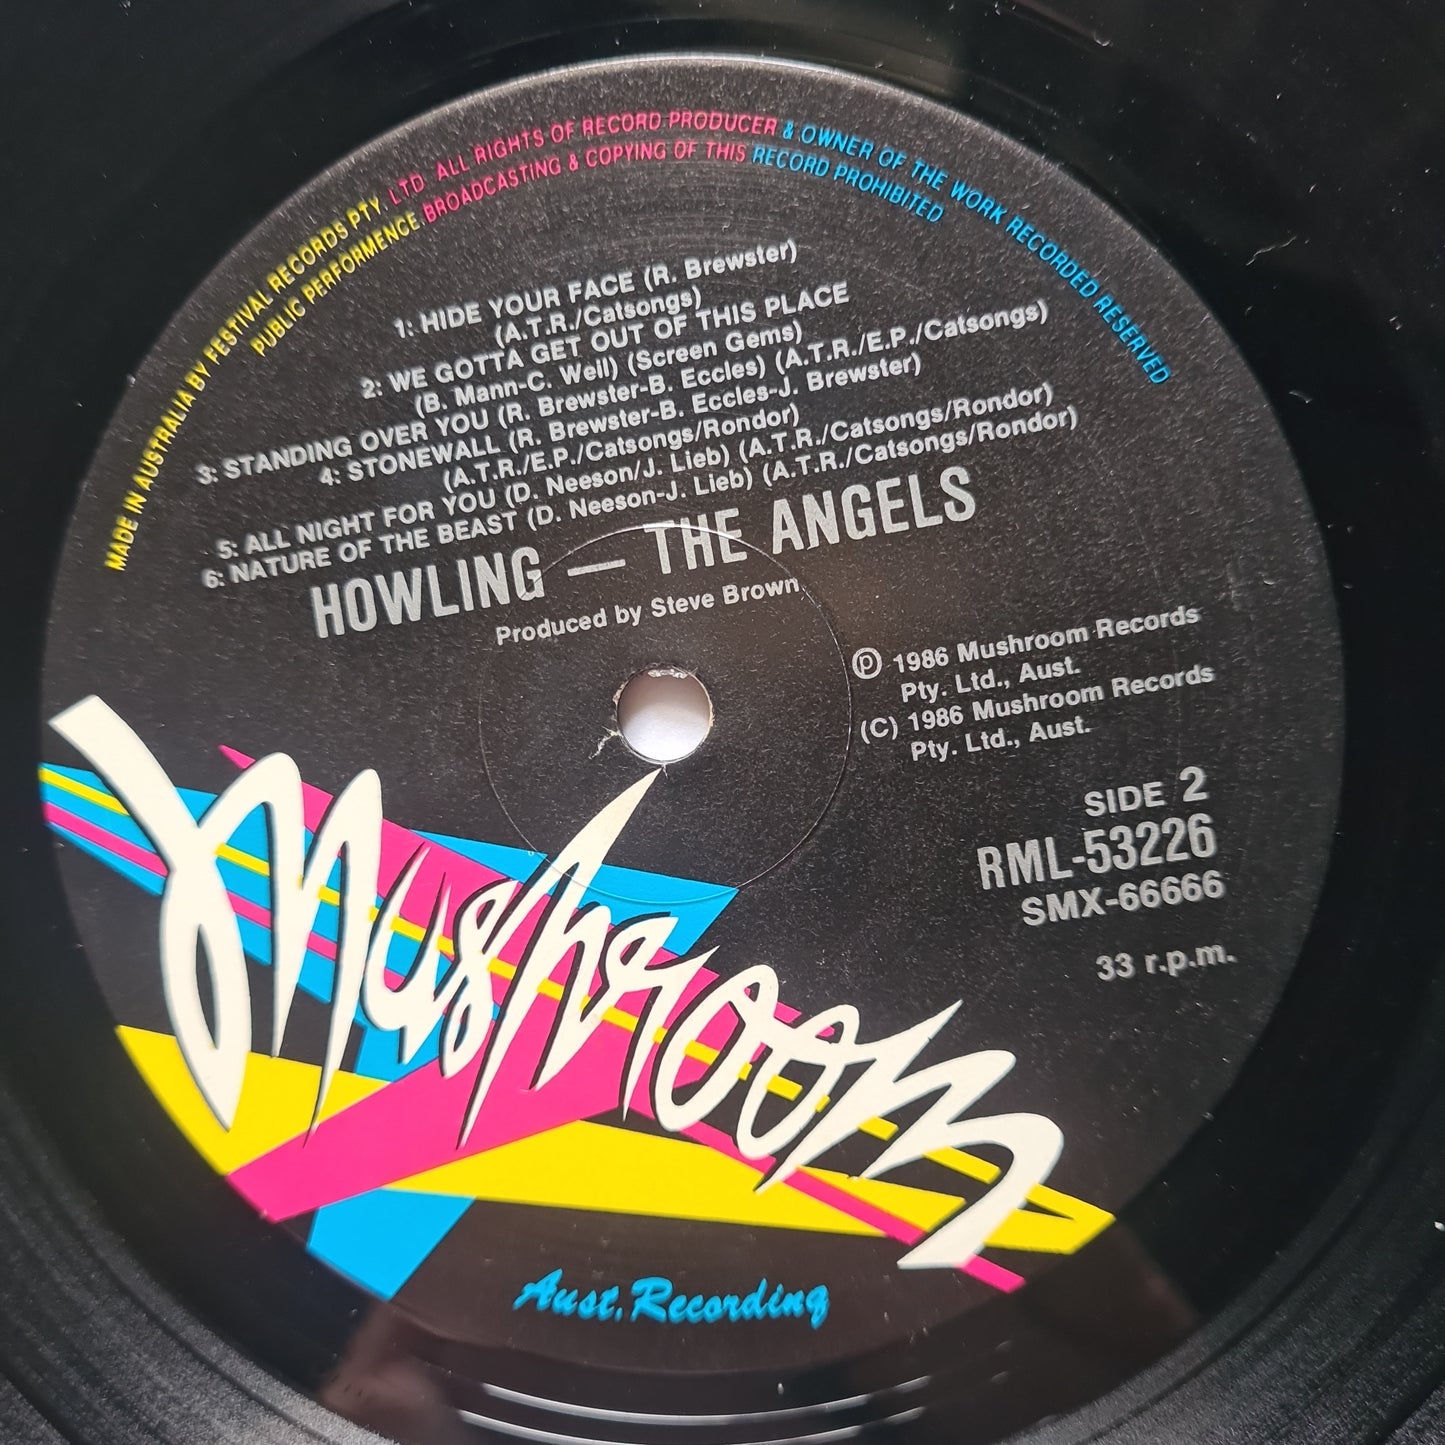 The Angels – Howling - 1986 - Vinyl Record